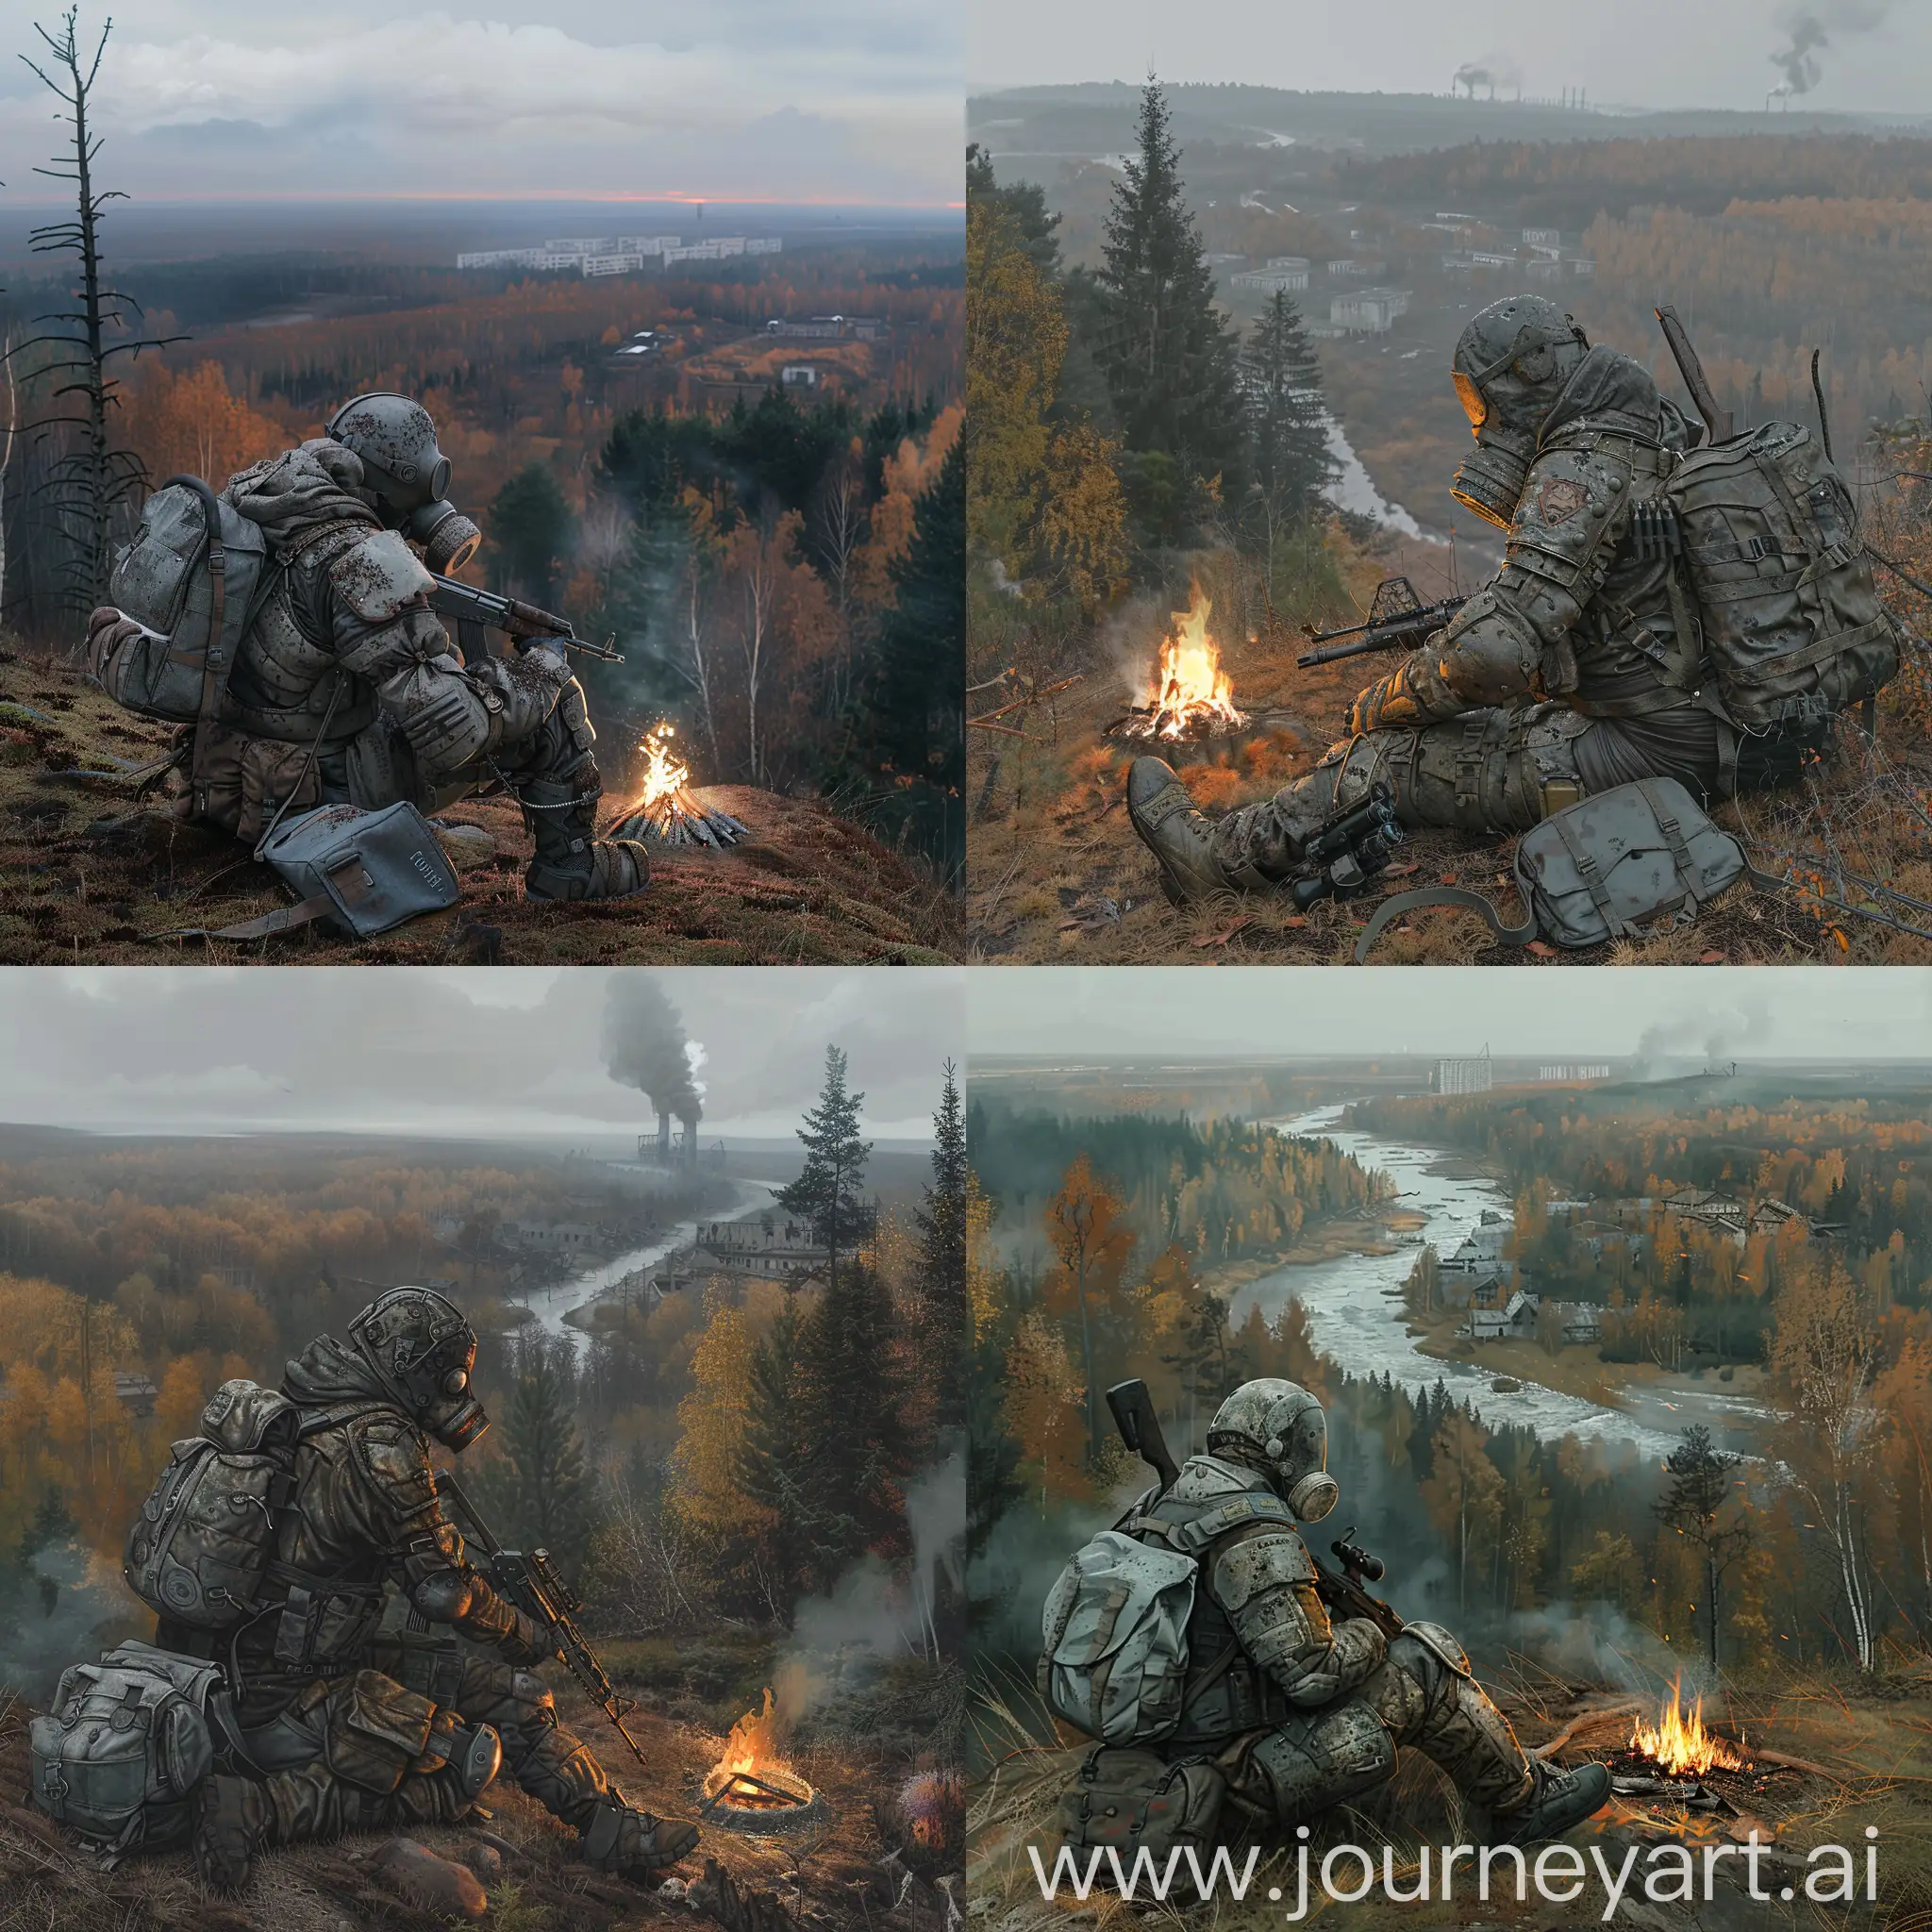 Digital art,  stalker are sitting on a hill by a campfire, stalker is wearing a dirty armored suit, a gasmask on his face, he has a rifle in his hands, a small gray backpack on his back, the weather is gloomy autumn, from the hill, where the stalker are sitting, there is a view of the forest and an abandoned Soviet village standing in the distance from abandoned city Pripyat.